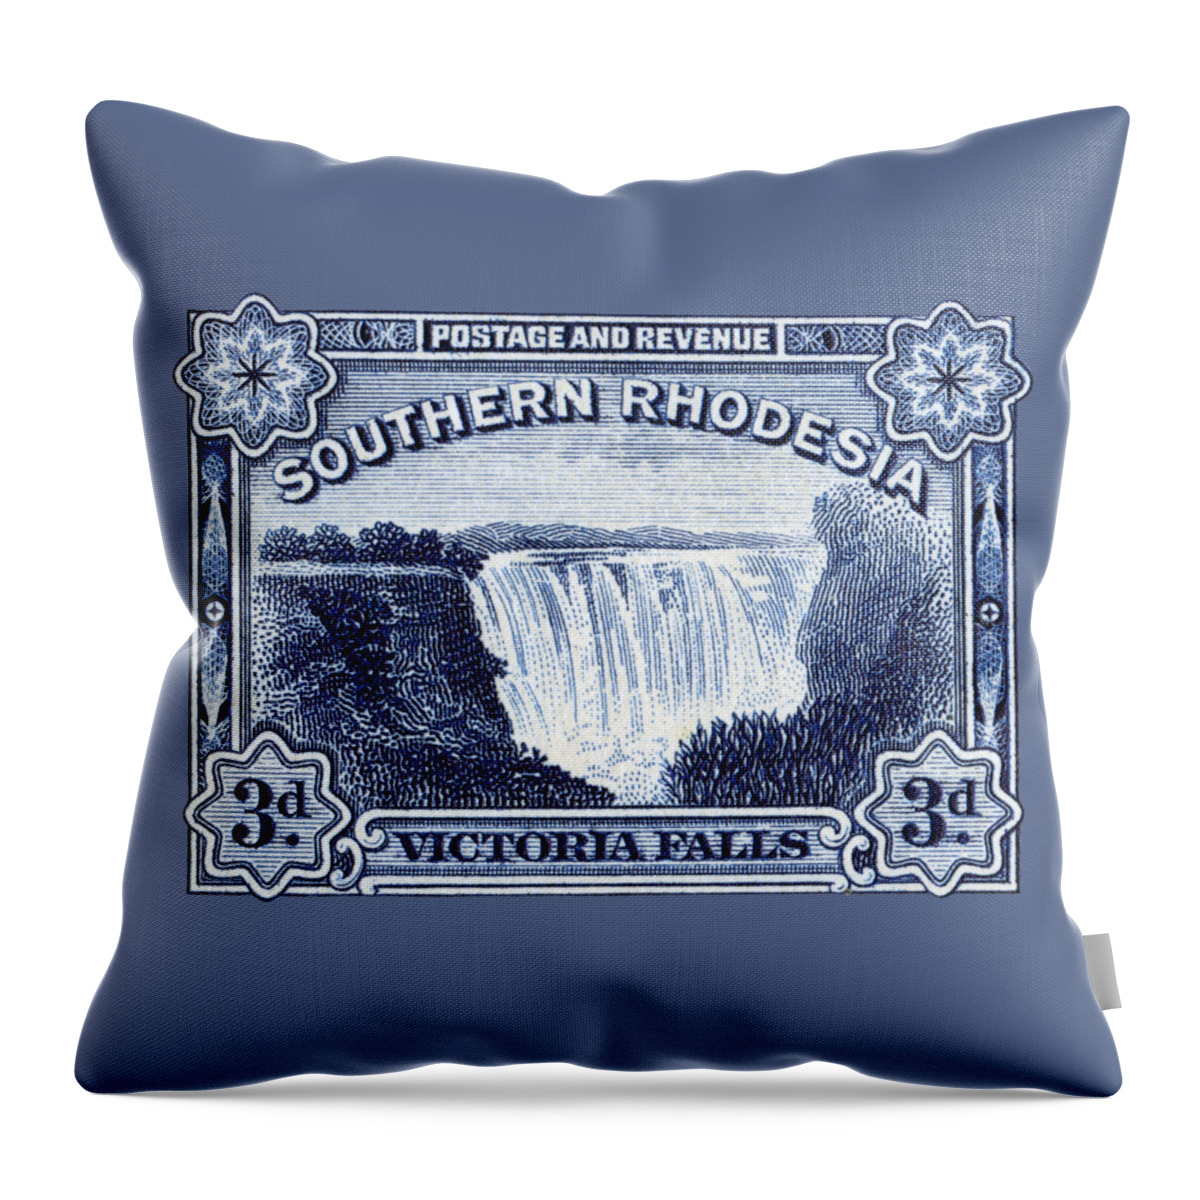 Waterfall Throw Pillow featuring the painting 1932 Southern Rhodesia Victoria Falls Stamp by Historic Image